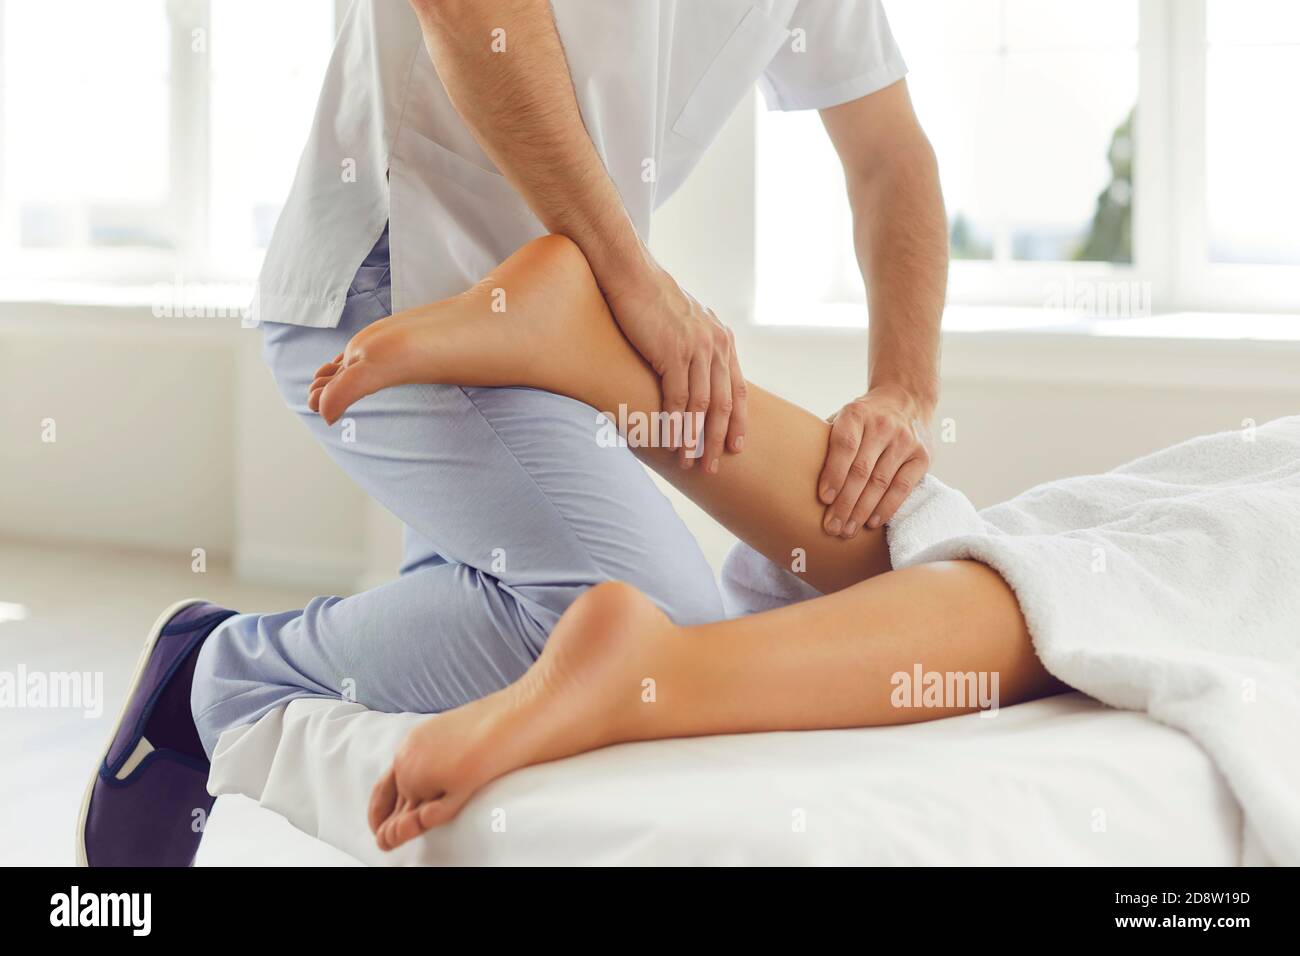 Physiotherapist or reflexologist massaging young woman's calf muscle in wellness center Stock Photo